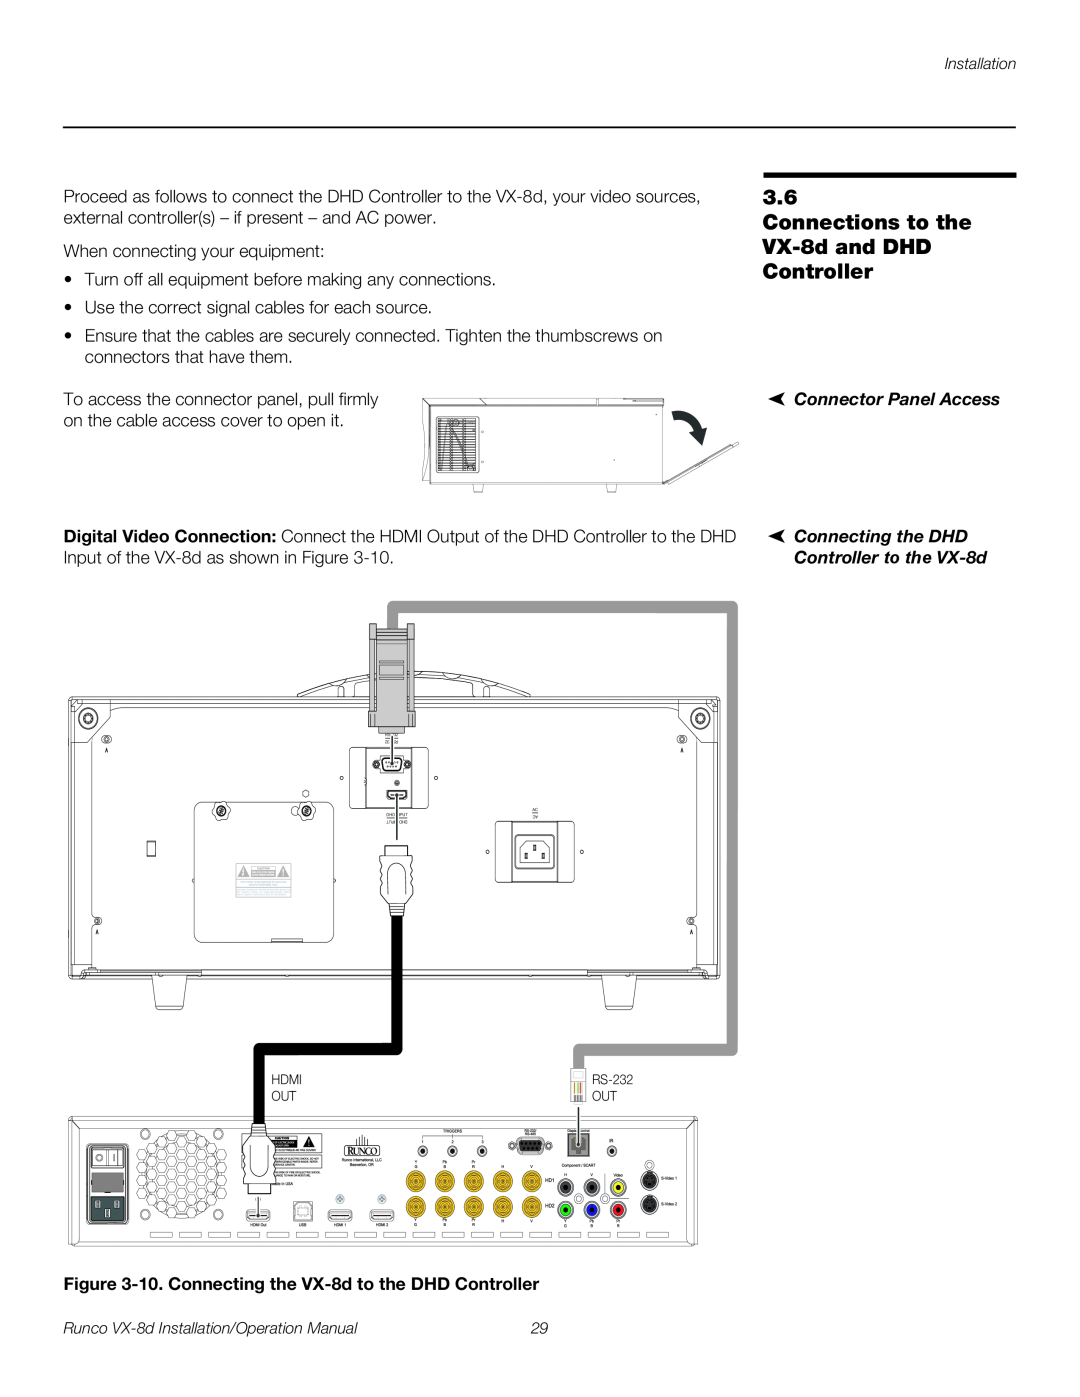 Runco VX-8D operation manual Connections to the VX-8d and DHD Controller, Connector Panel Access, Connecting the DHD 